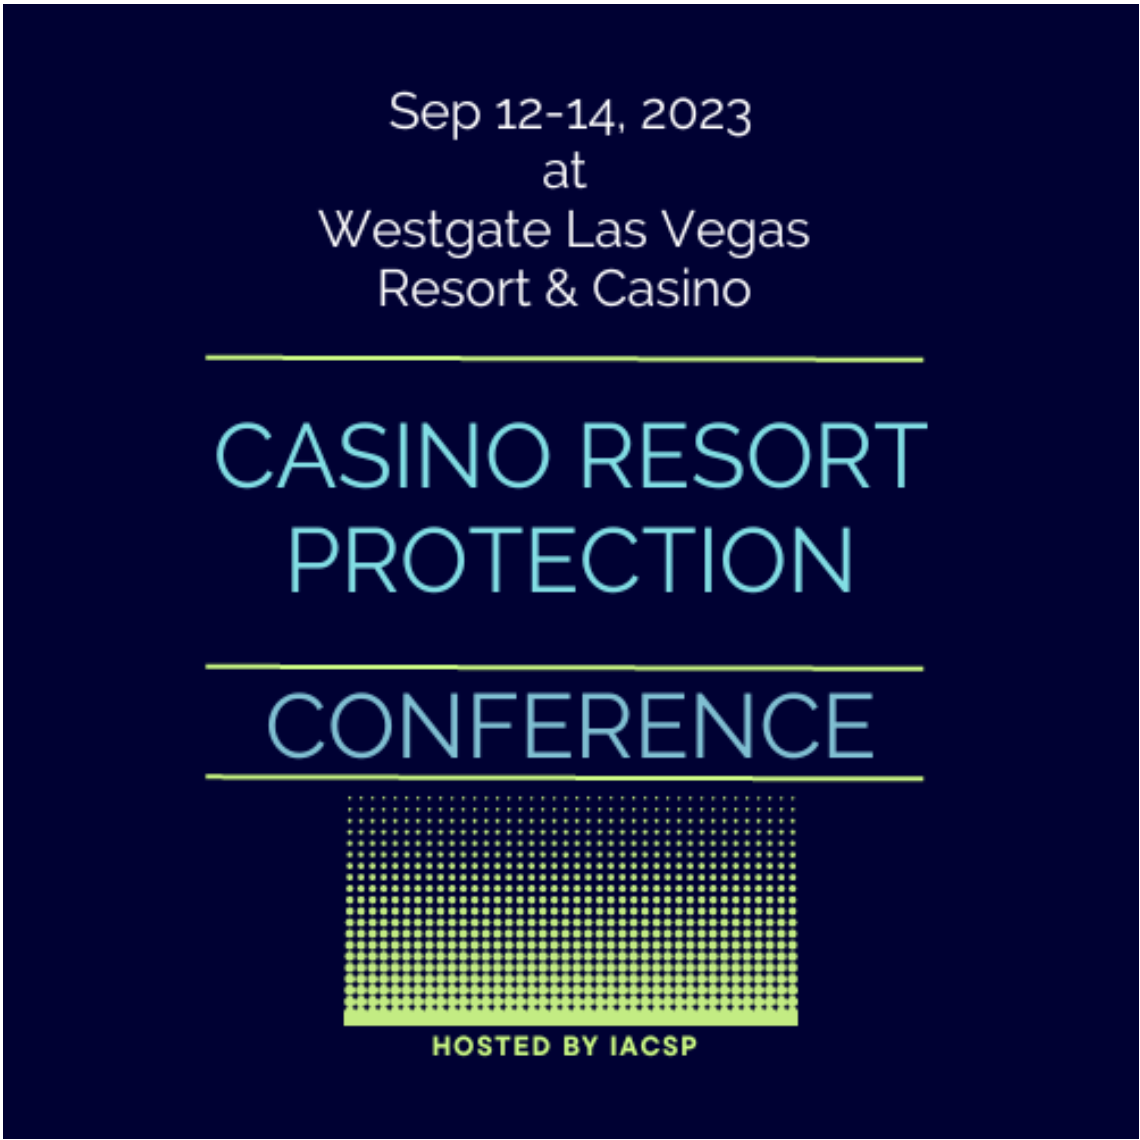 Casino Resort Protection Conference